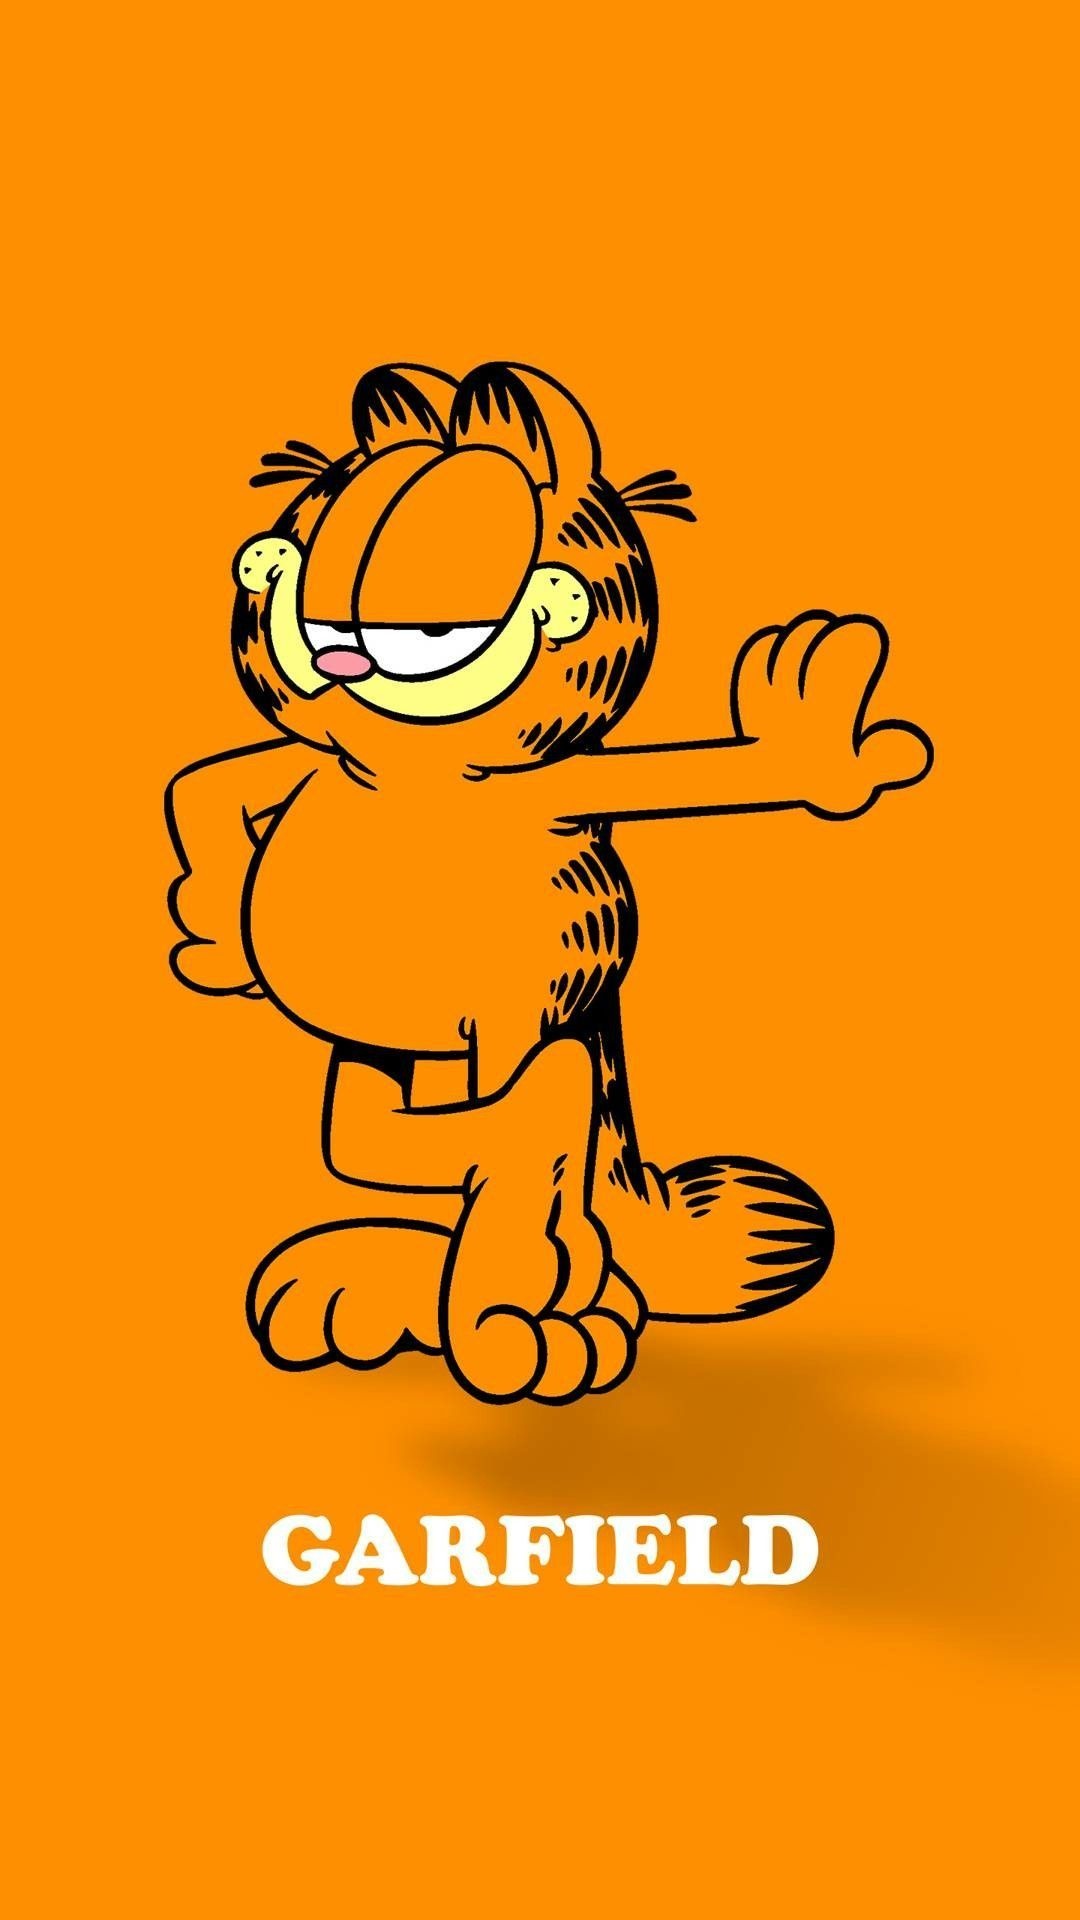 Garfield: As a kitten, he develops a taste for lasagna, which would become his favorite food. 1080x1920 Full HD Wallpaper.